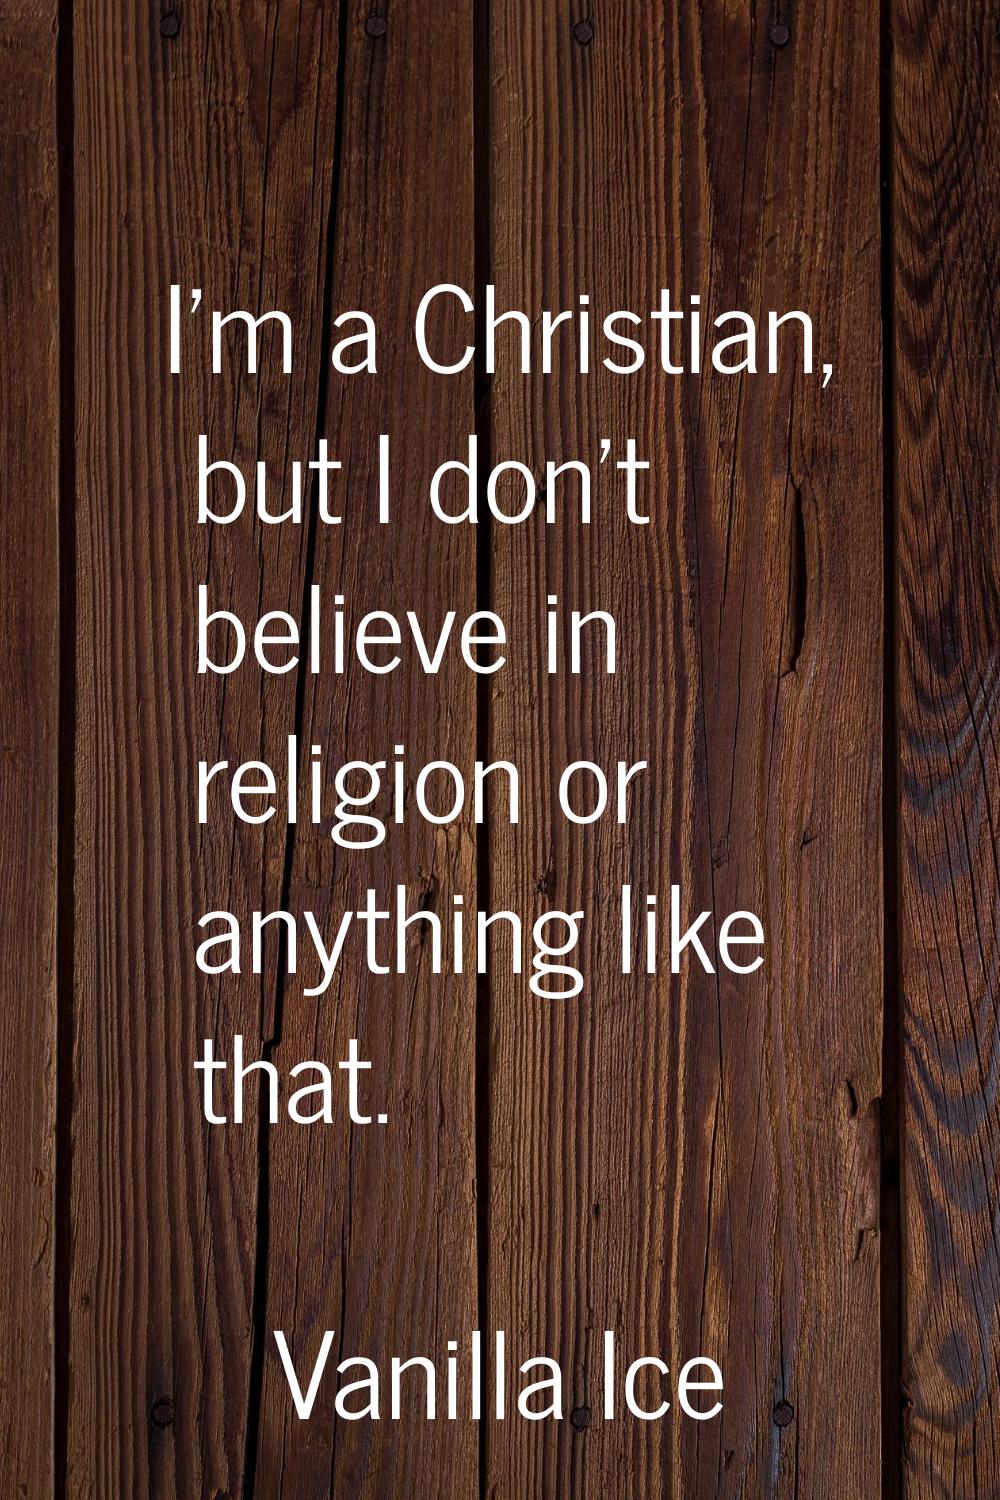 I'm a Christian, but I don't believe in religion or anything like that.